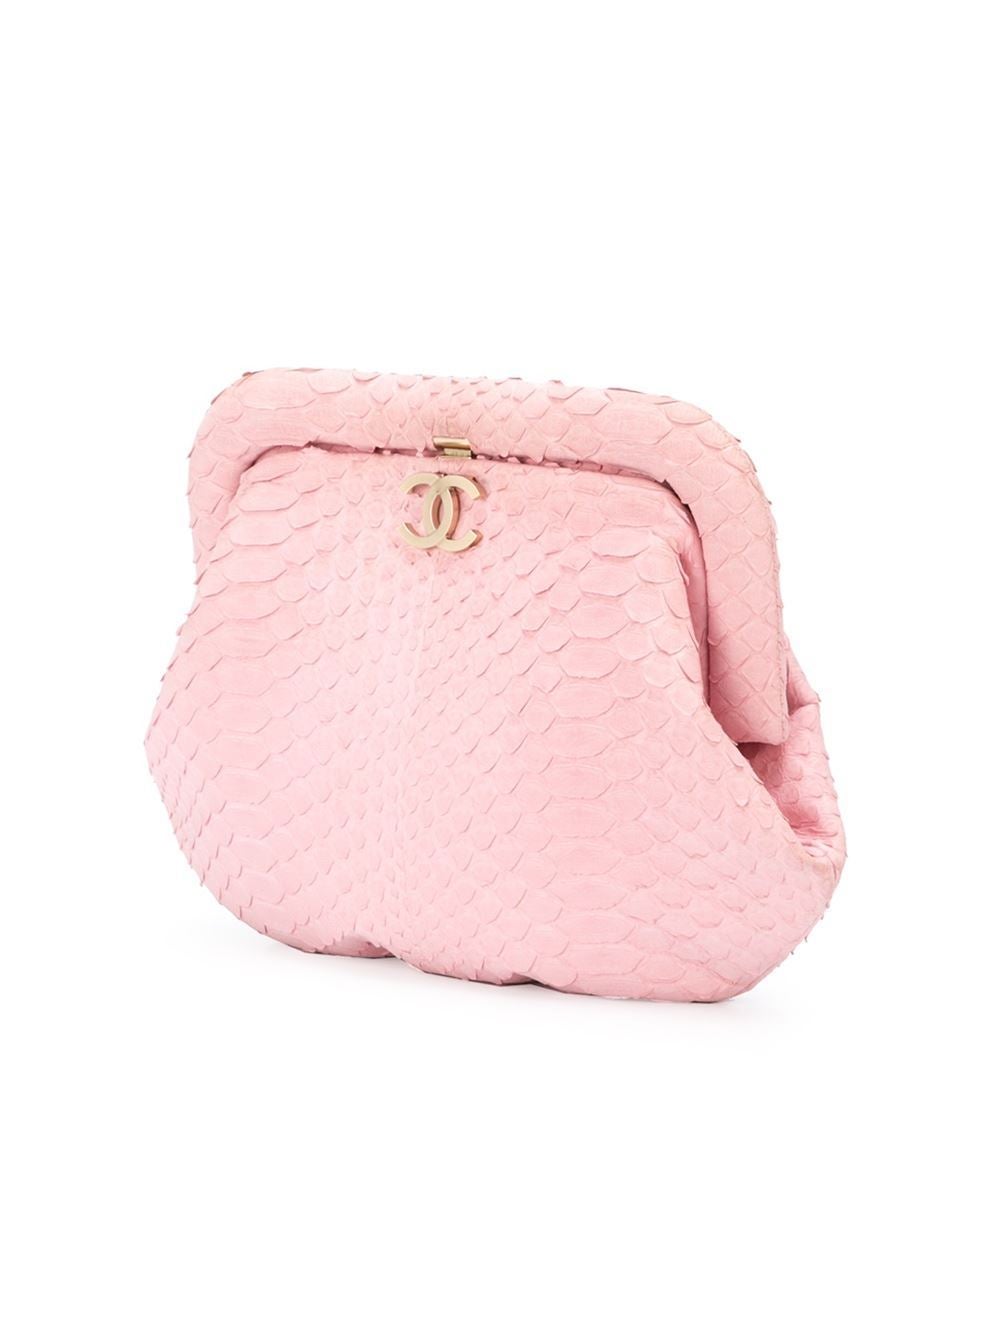 This pink python skin small embossed clutch from Chanel features a top clasp fastening, a gold-tone logo plaque and an internal logo plaque. 

Colour: Pink

Material: Python

Measurements: height: 19 centimetres, width: 25